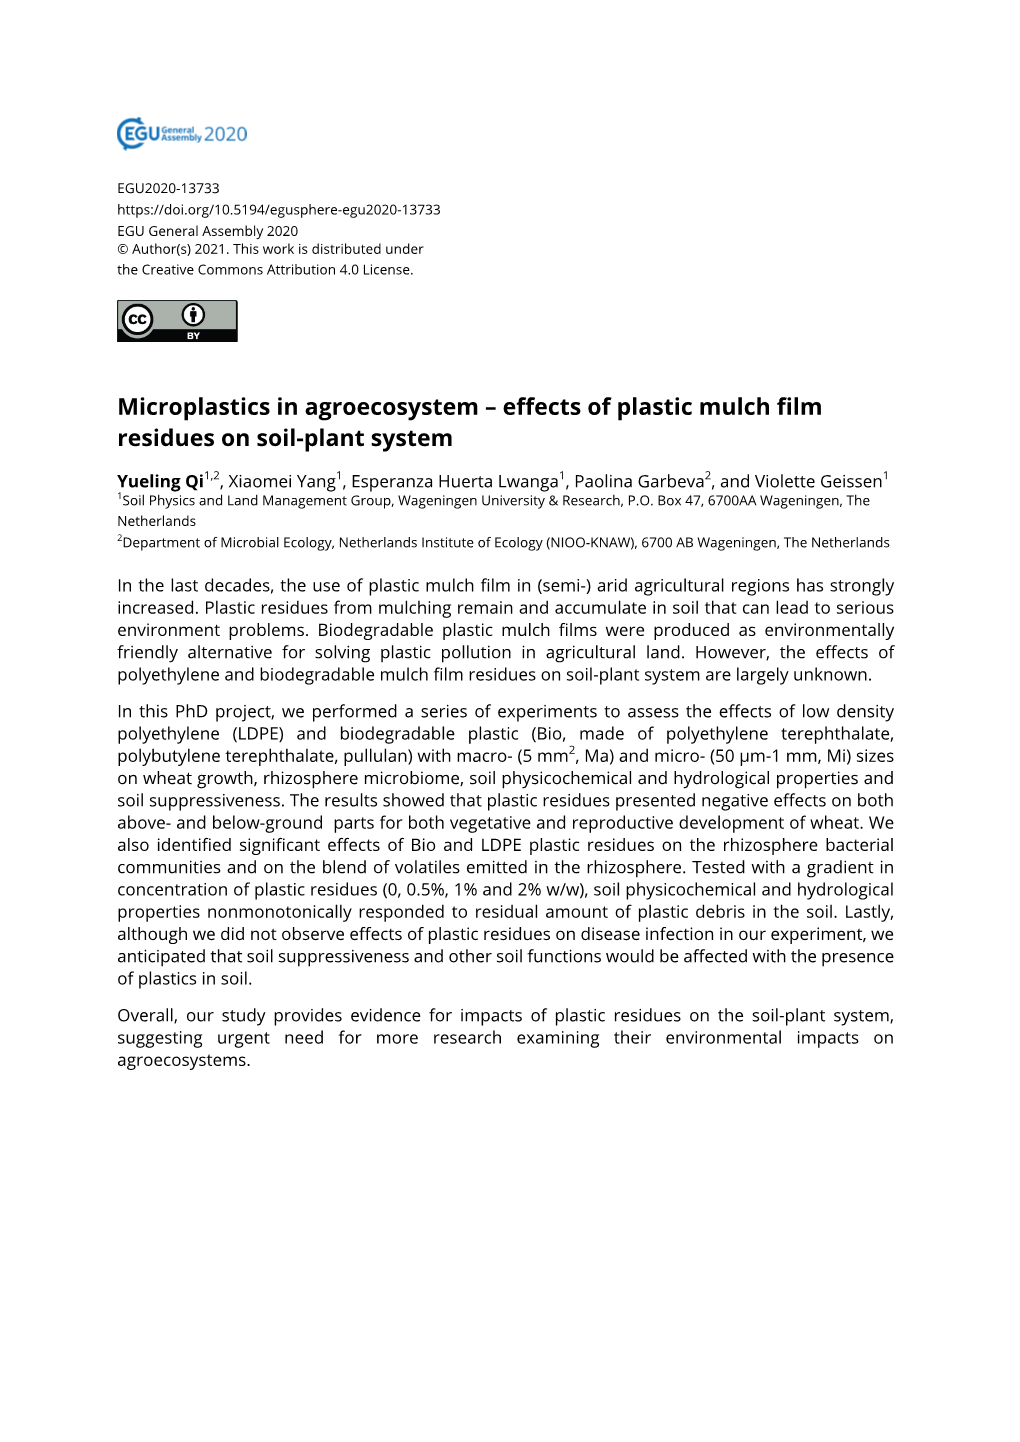 Effects of Plastic Mulch Film Residues on Soil-Plant System